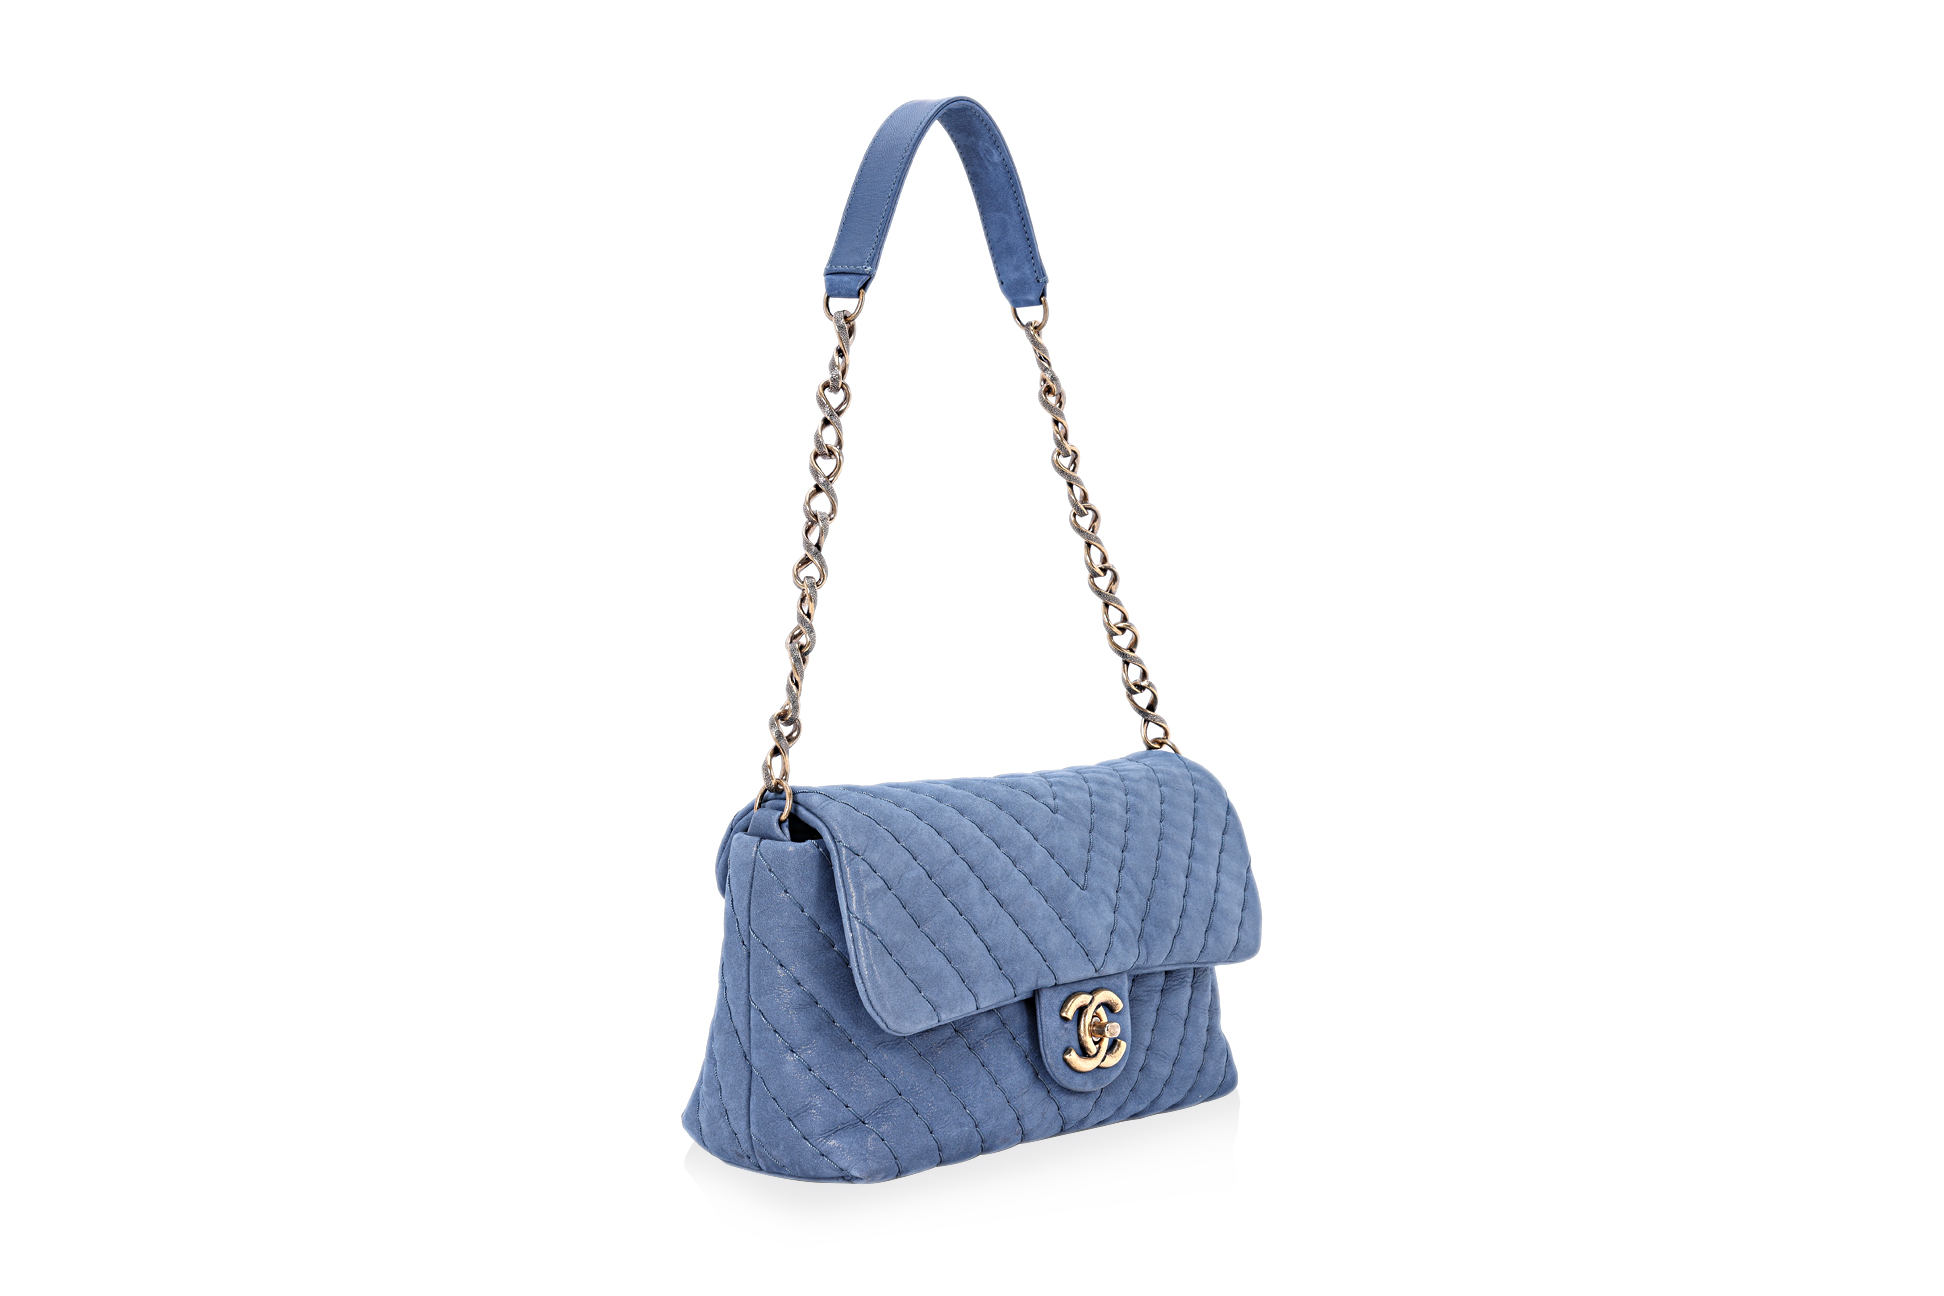 A CHANEL BLUE CHEVRON QUILTED FLAP BAG - Image 4 of 9